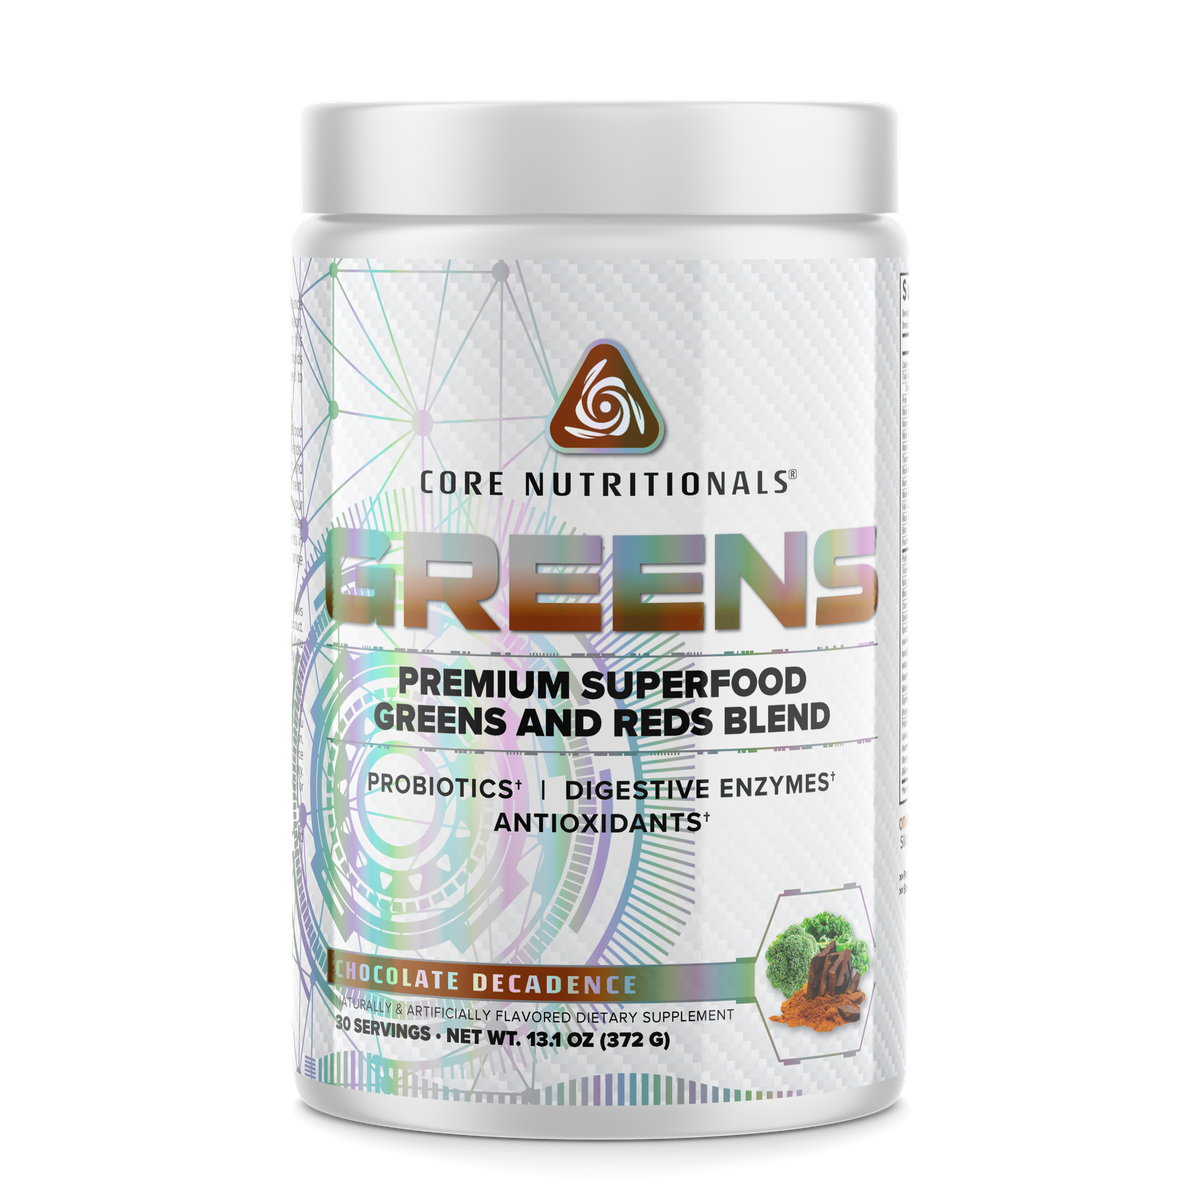 Core Nutritionals GREENS – Professional Supplements & Protein From A-list Nutrition